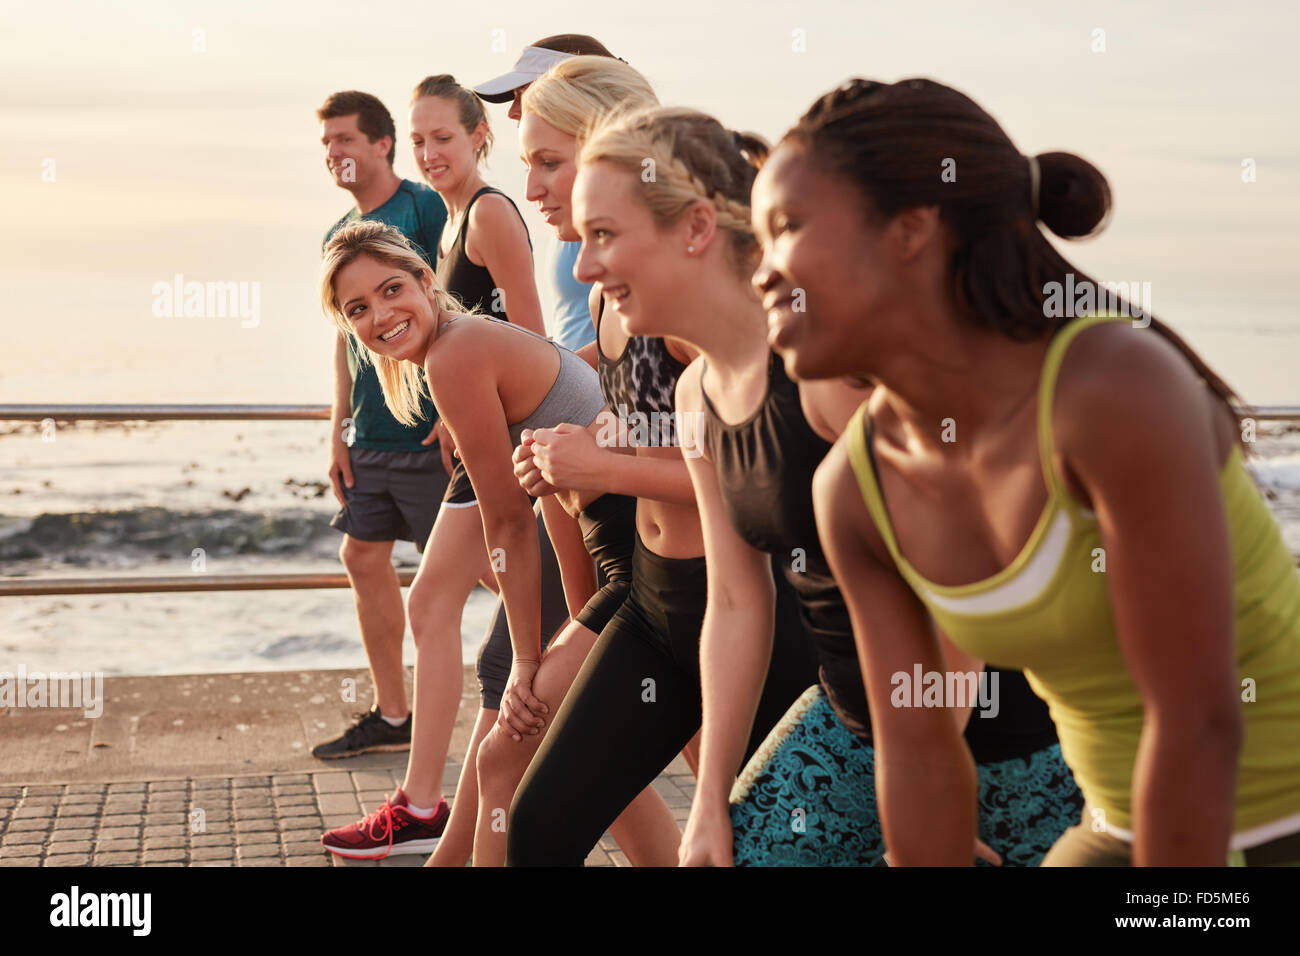 Group of young athletes in start position, focus on woman. Fit young people preparing for race along sea. Stock Photo